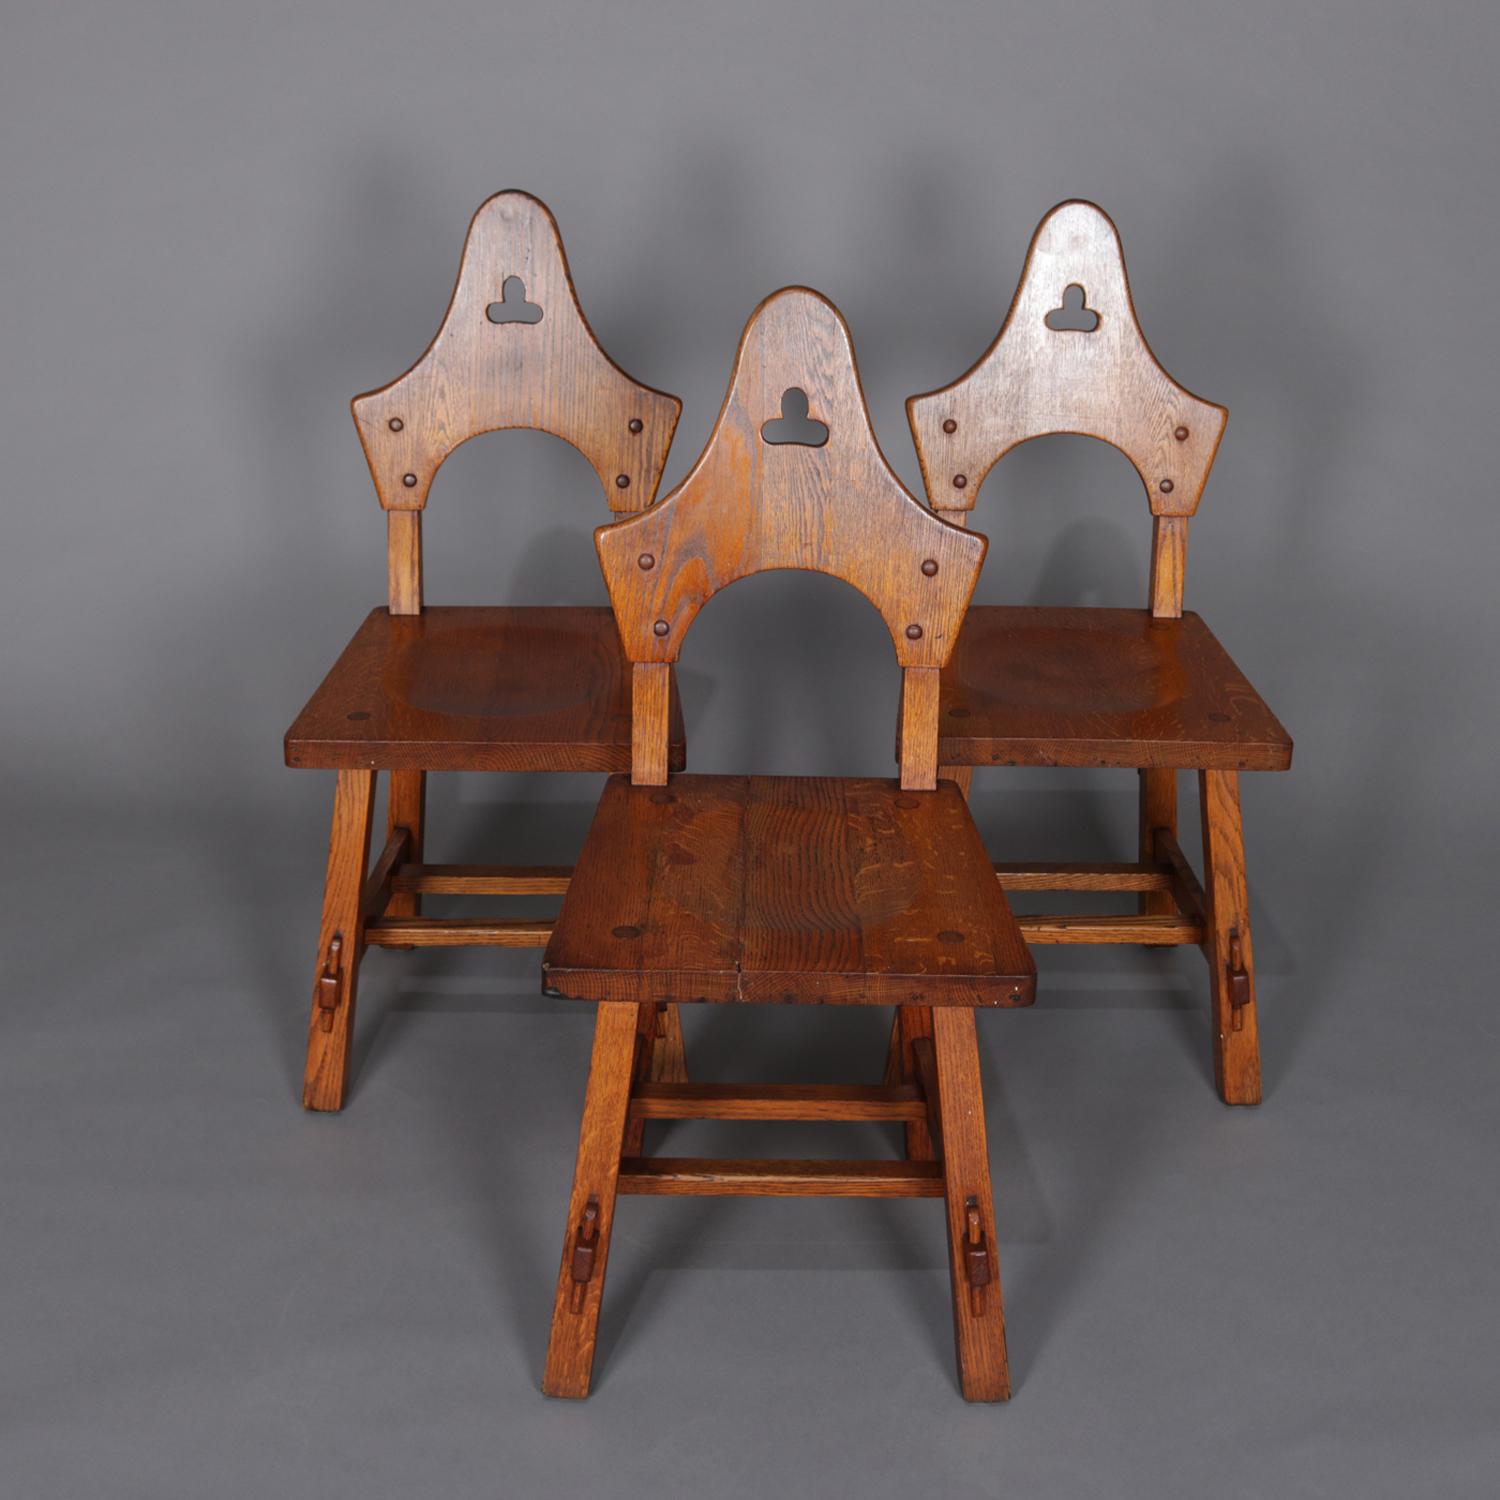 Set of 3 Arts & Crafts mission oak dining chairs by Limbert feature shaped backs with cut out stylized shamrocks, circa 1910

Measures: 36